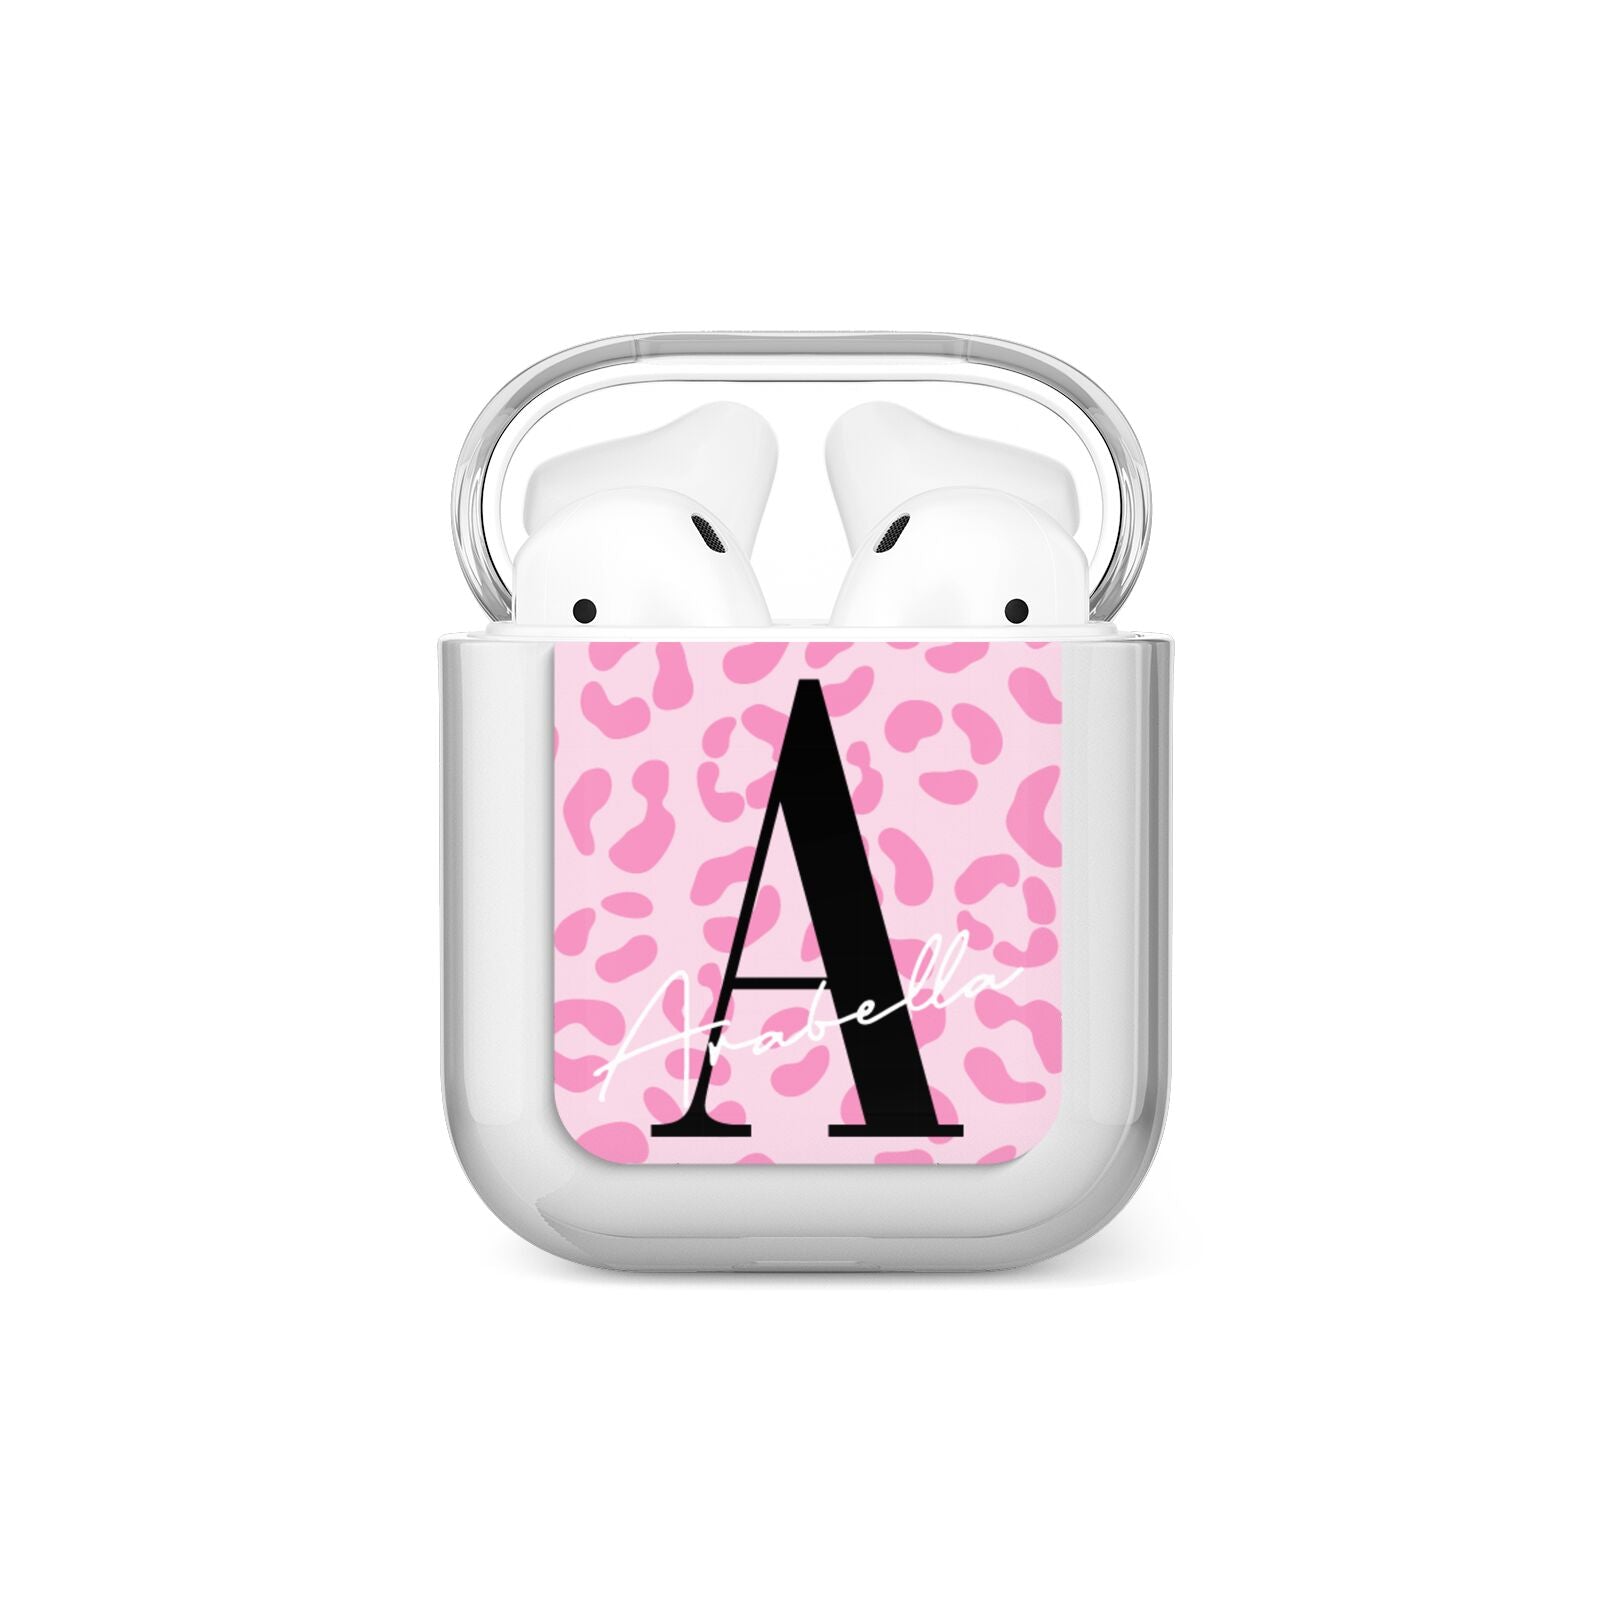 Personalised Pink Leopard Print AirPods Case